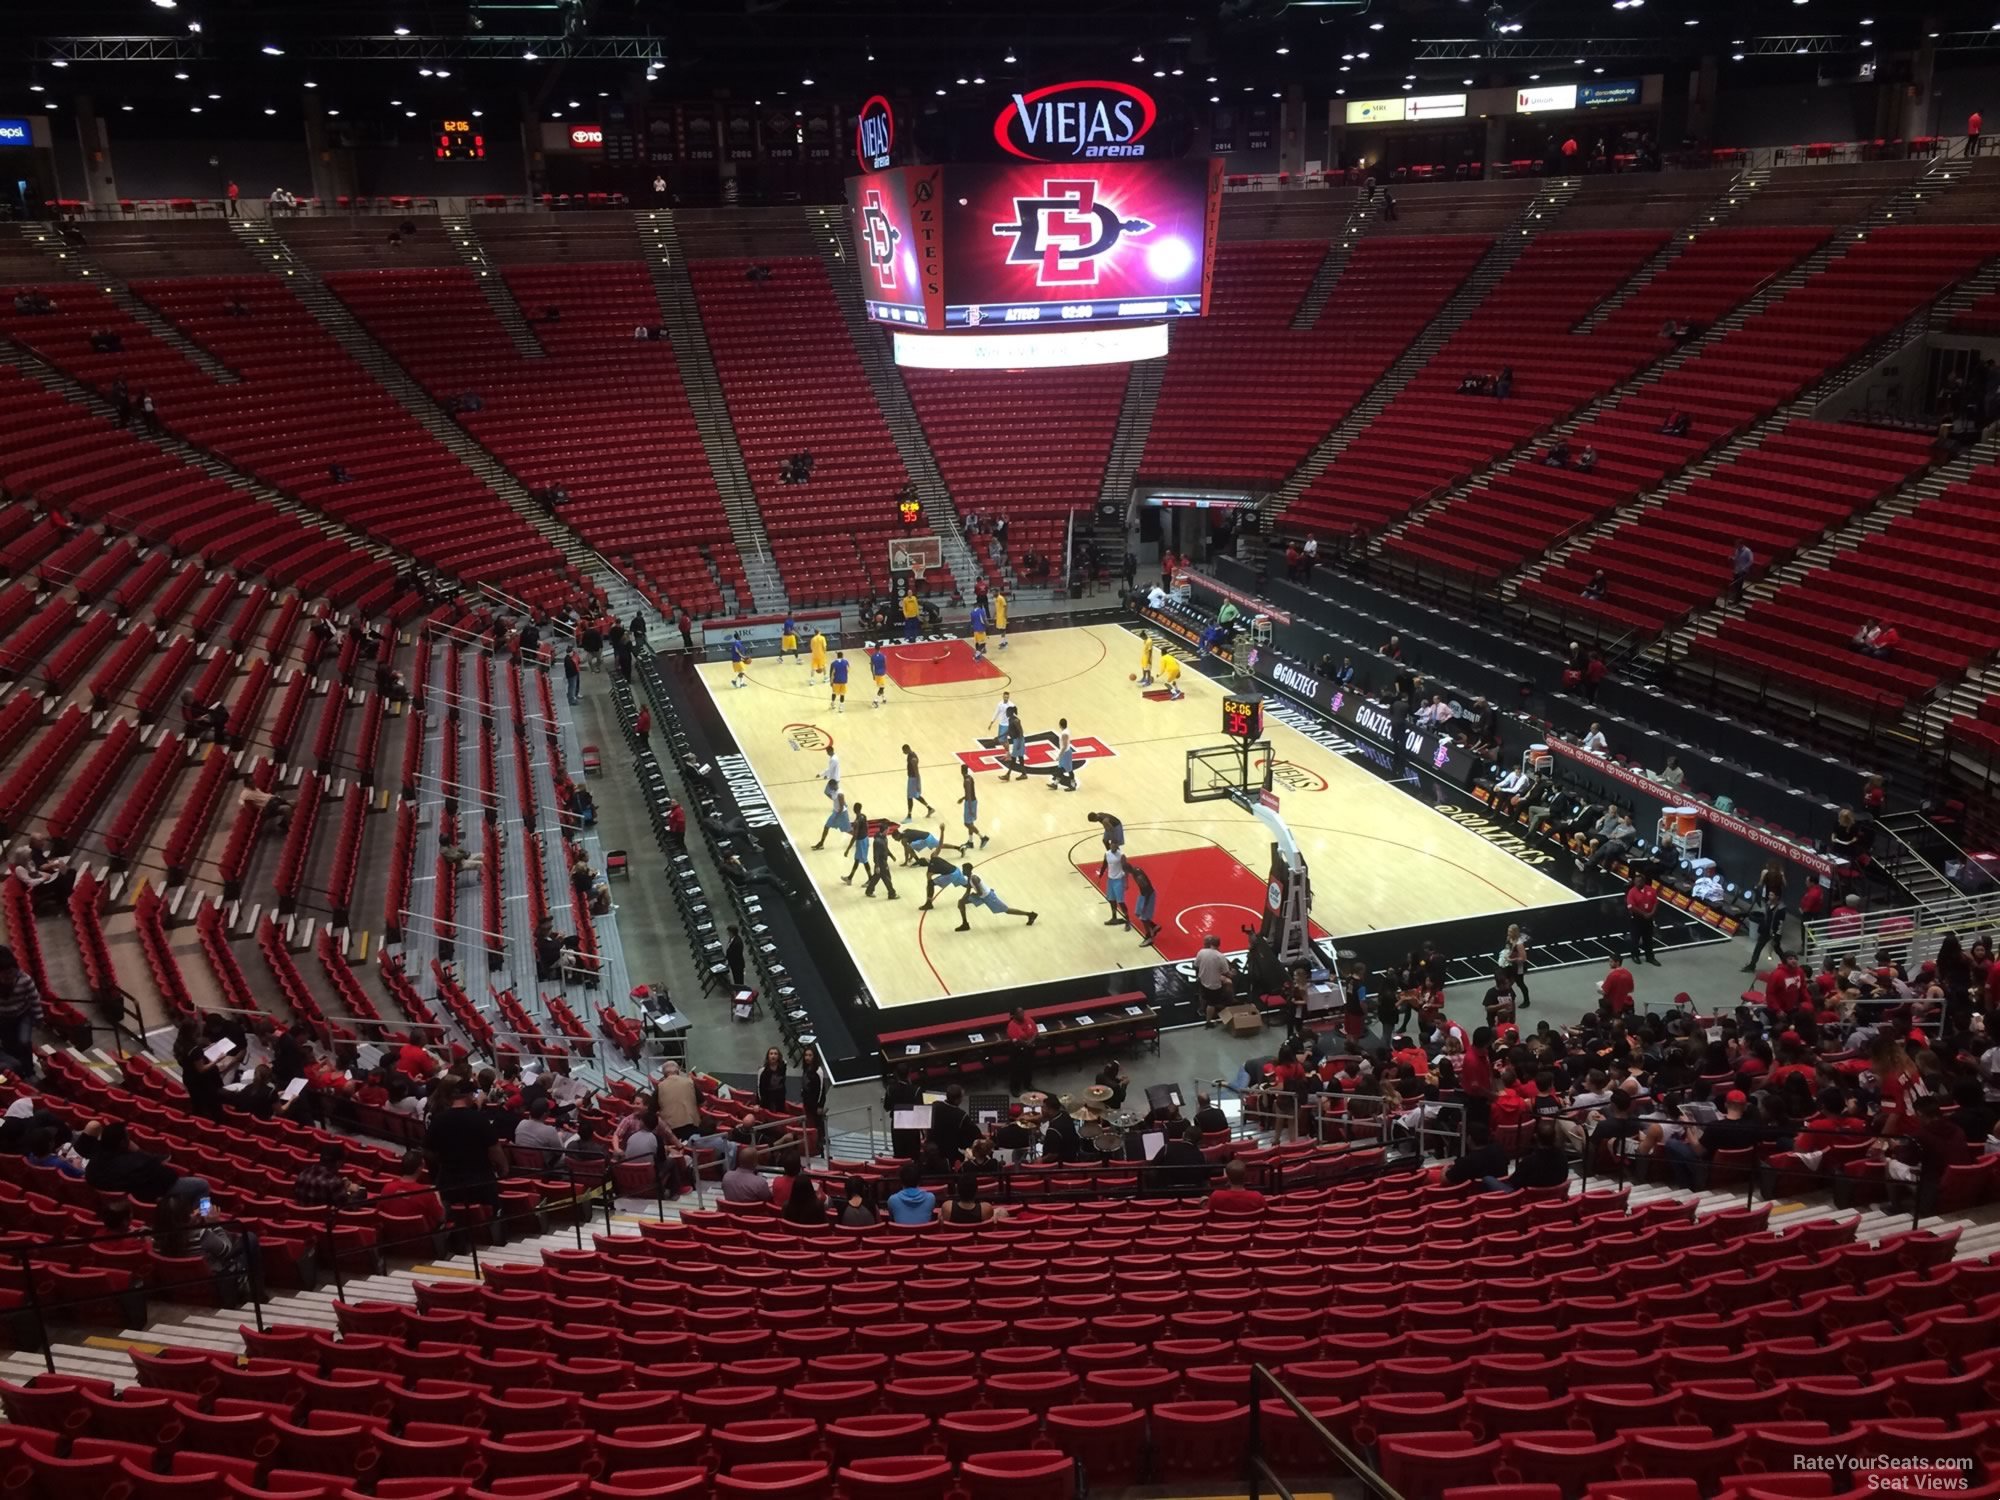 section k, row 30 seat view  - viejas arena